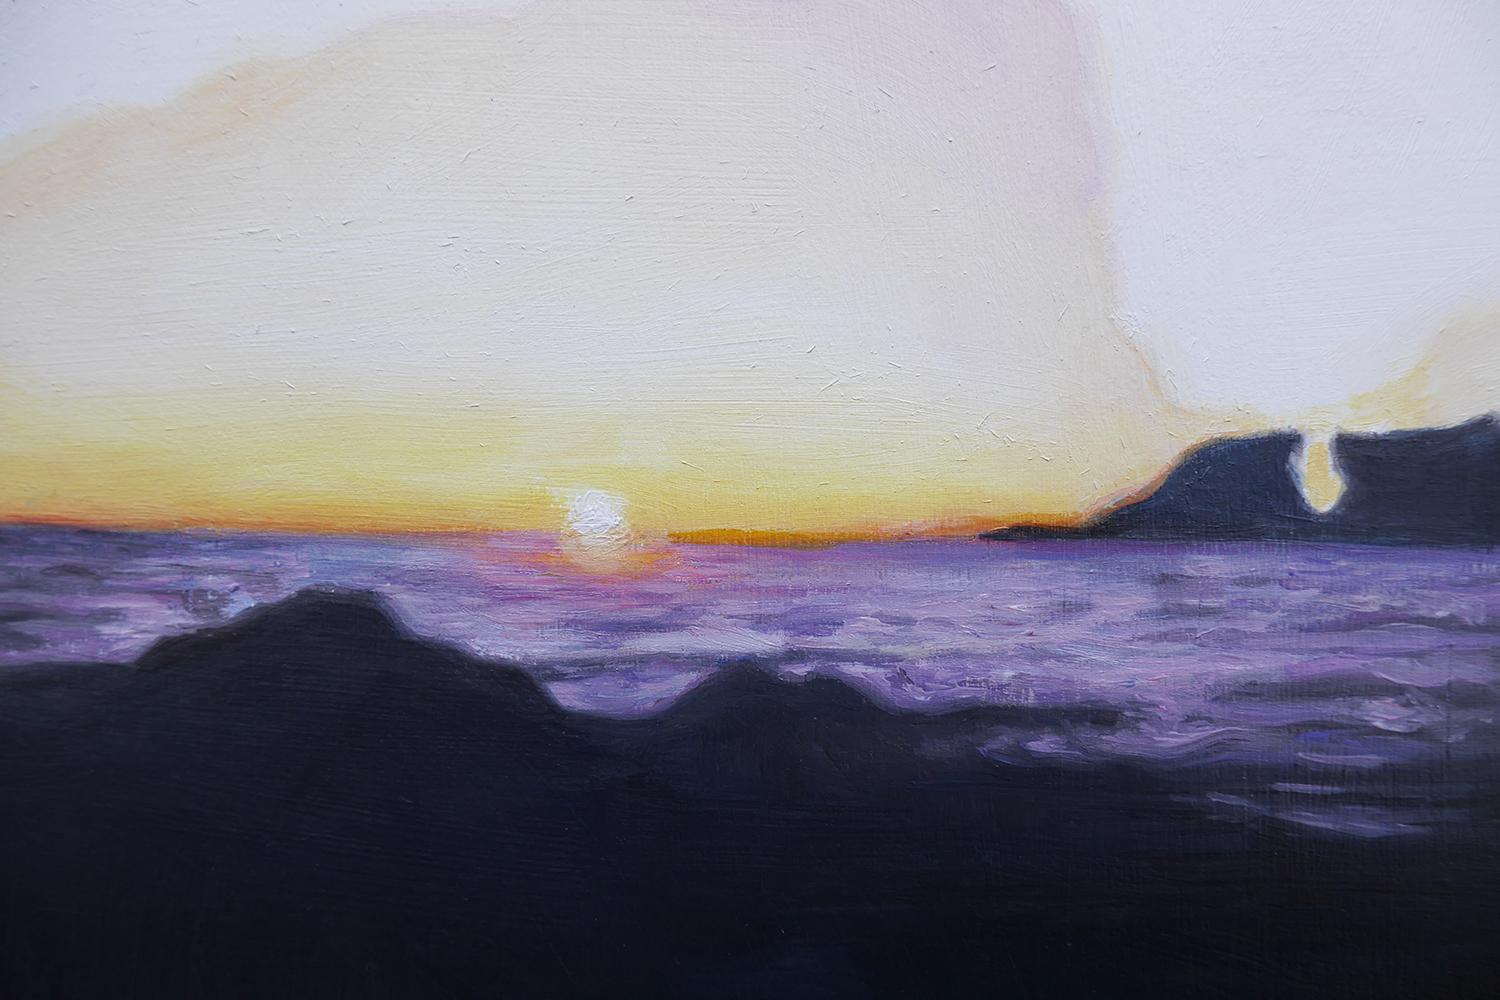 <p>Artist Comments<br />A sunset over a rocky coastline and luminous clouds rendered with a bold and graphic approach. The divergence between the clouds and the shoreline embody the discrepancy between real and unreal in memory and